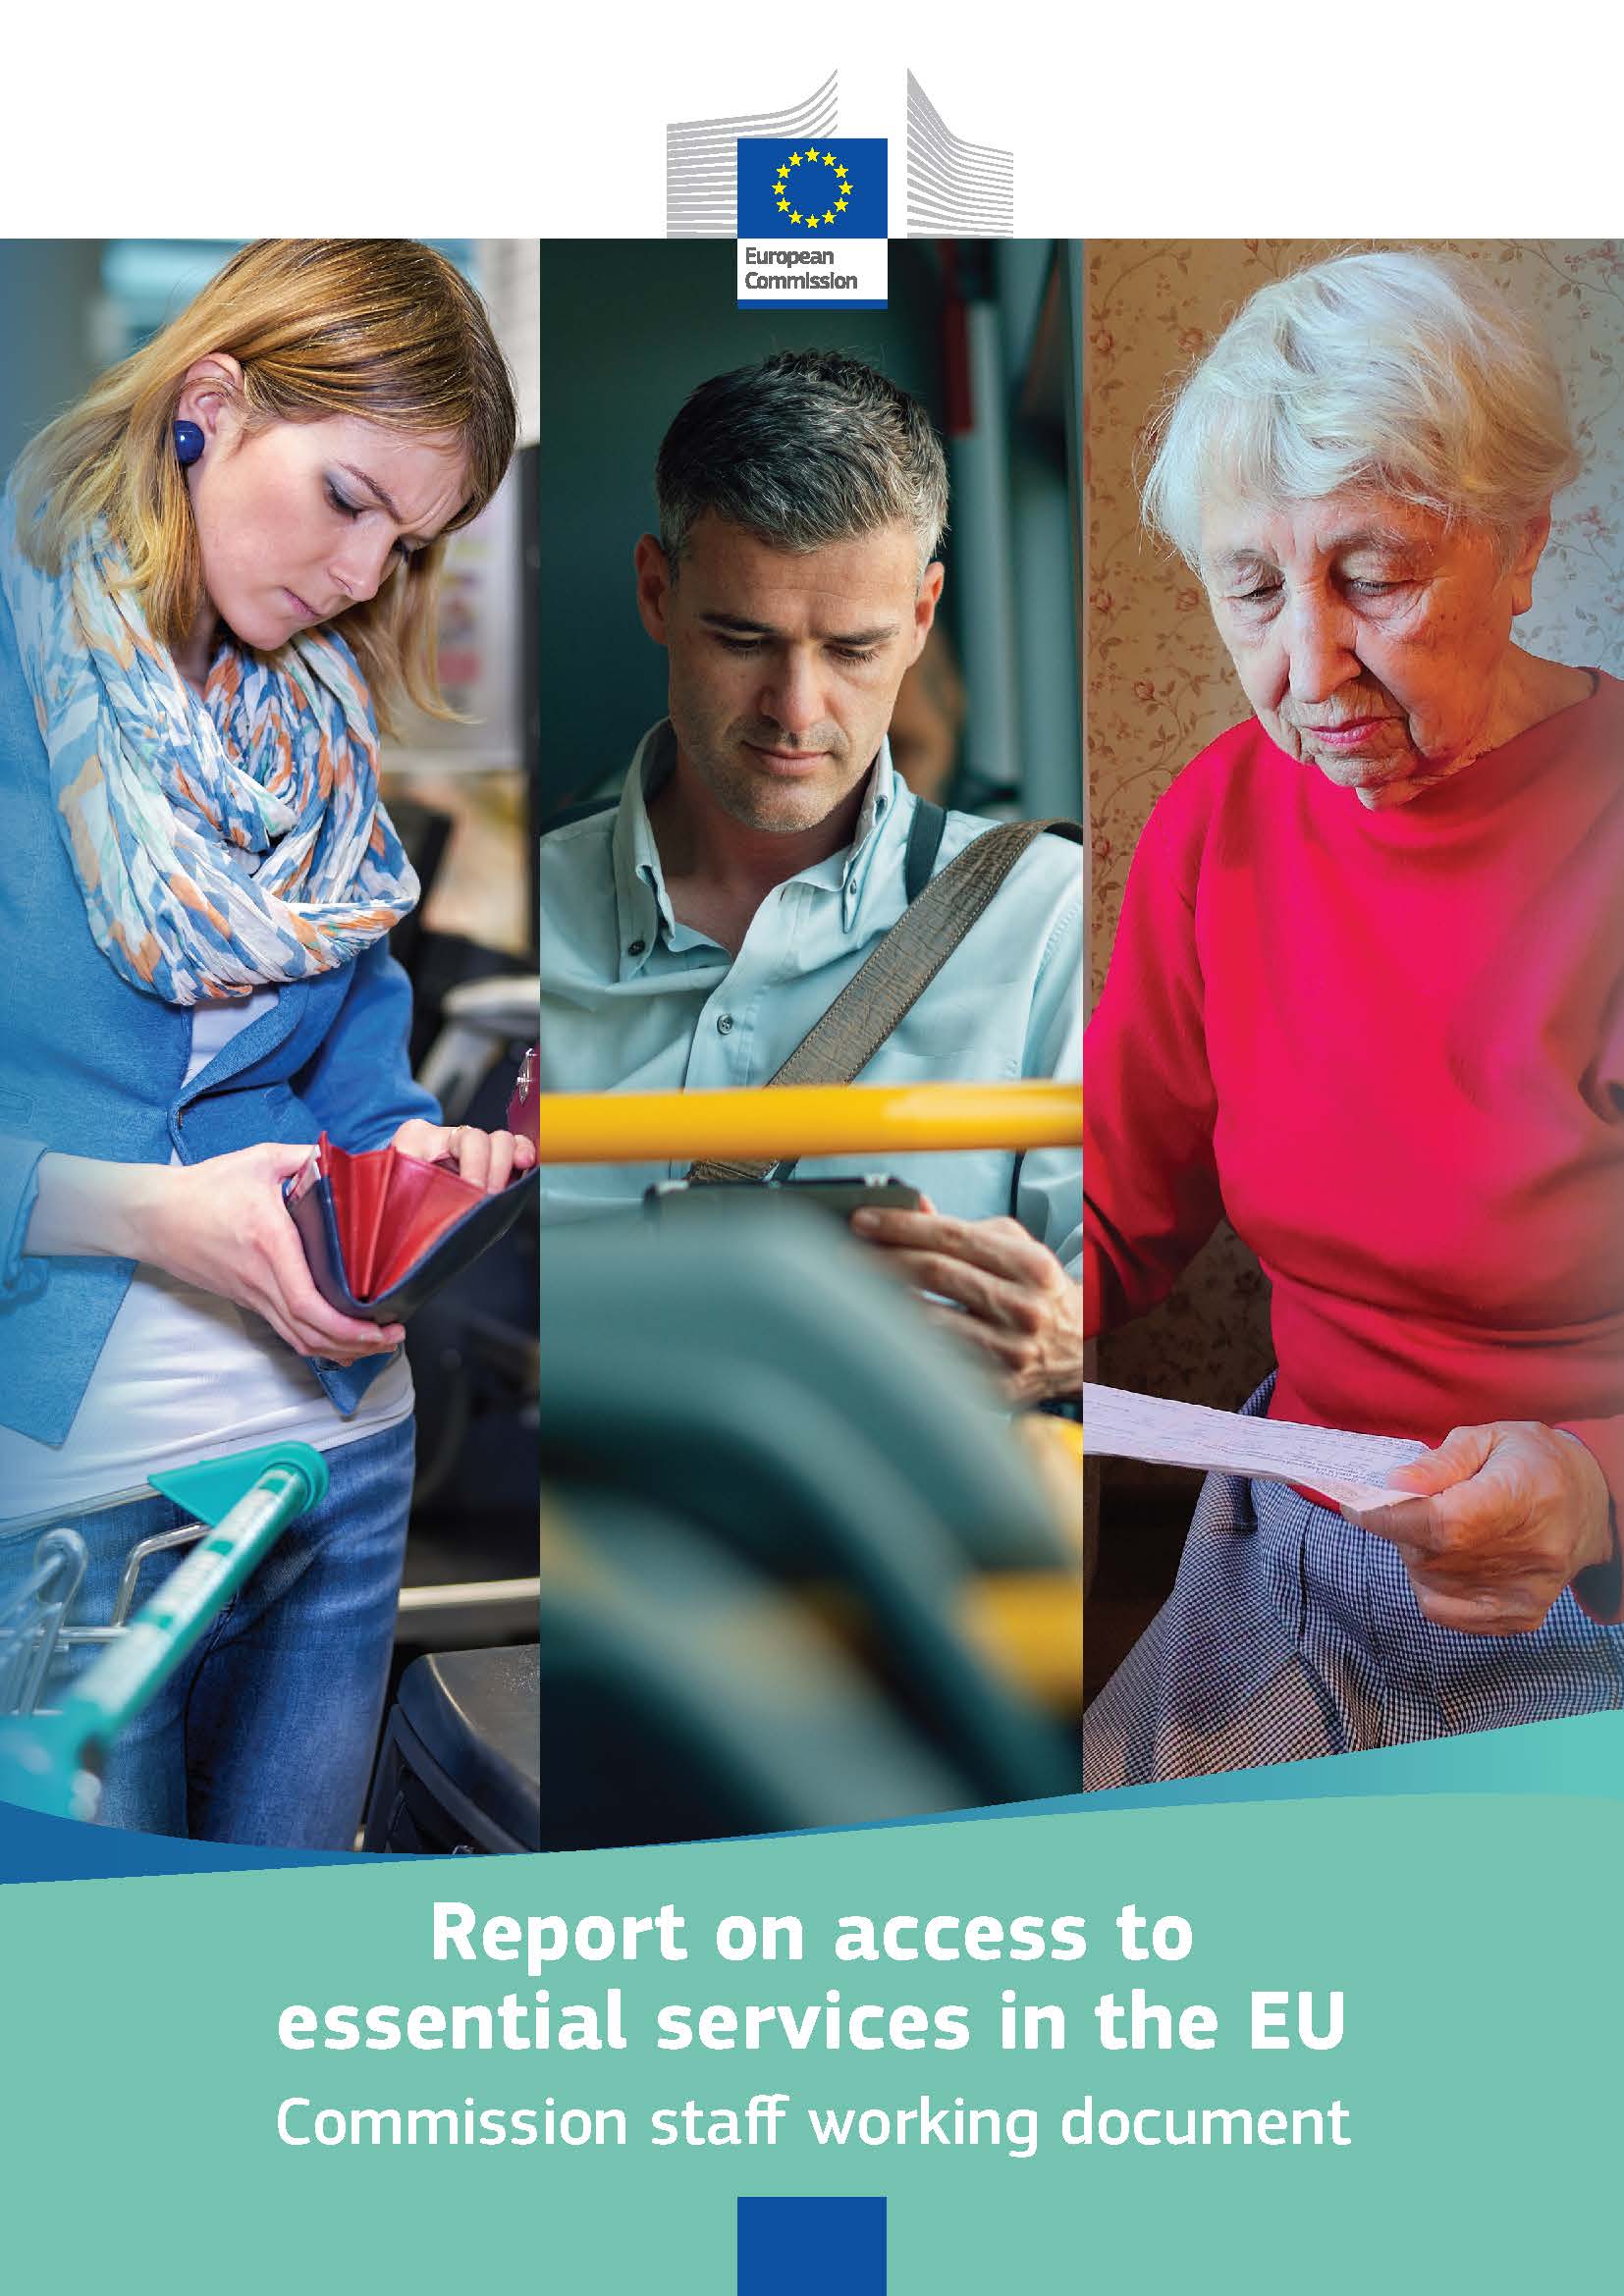 Report on access to essential services in the EU - Commission staff working document